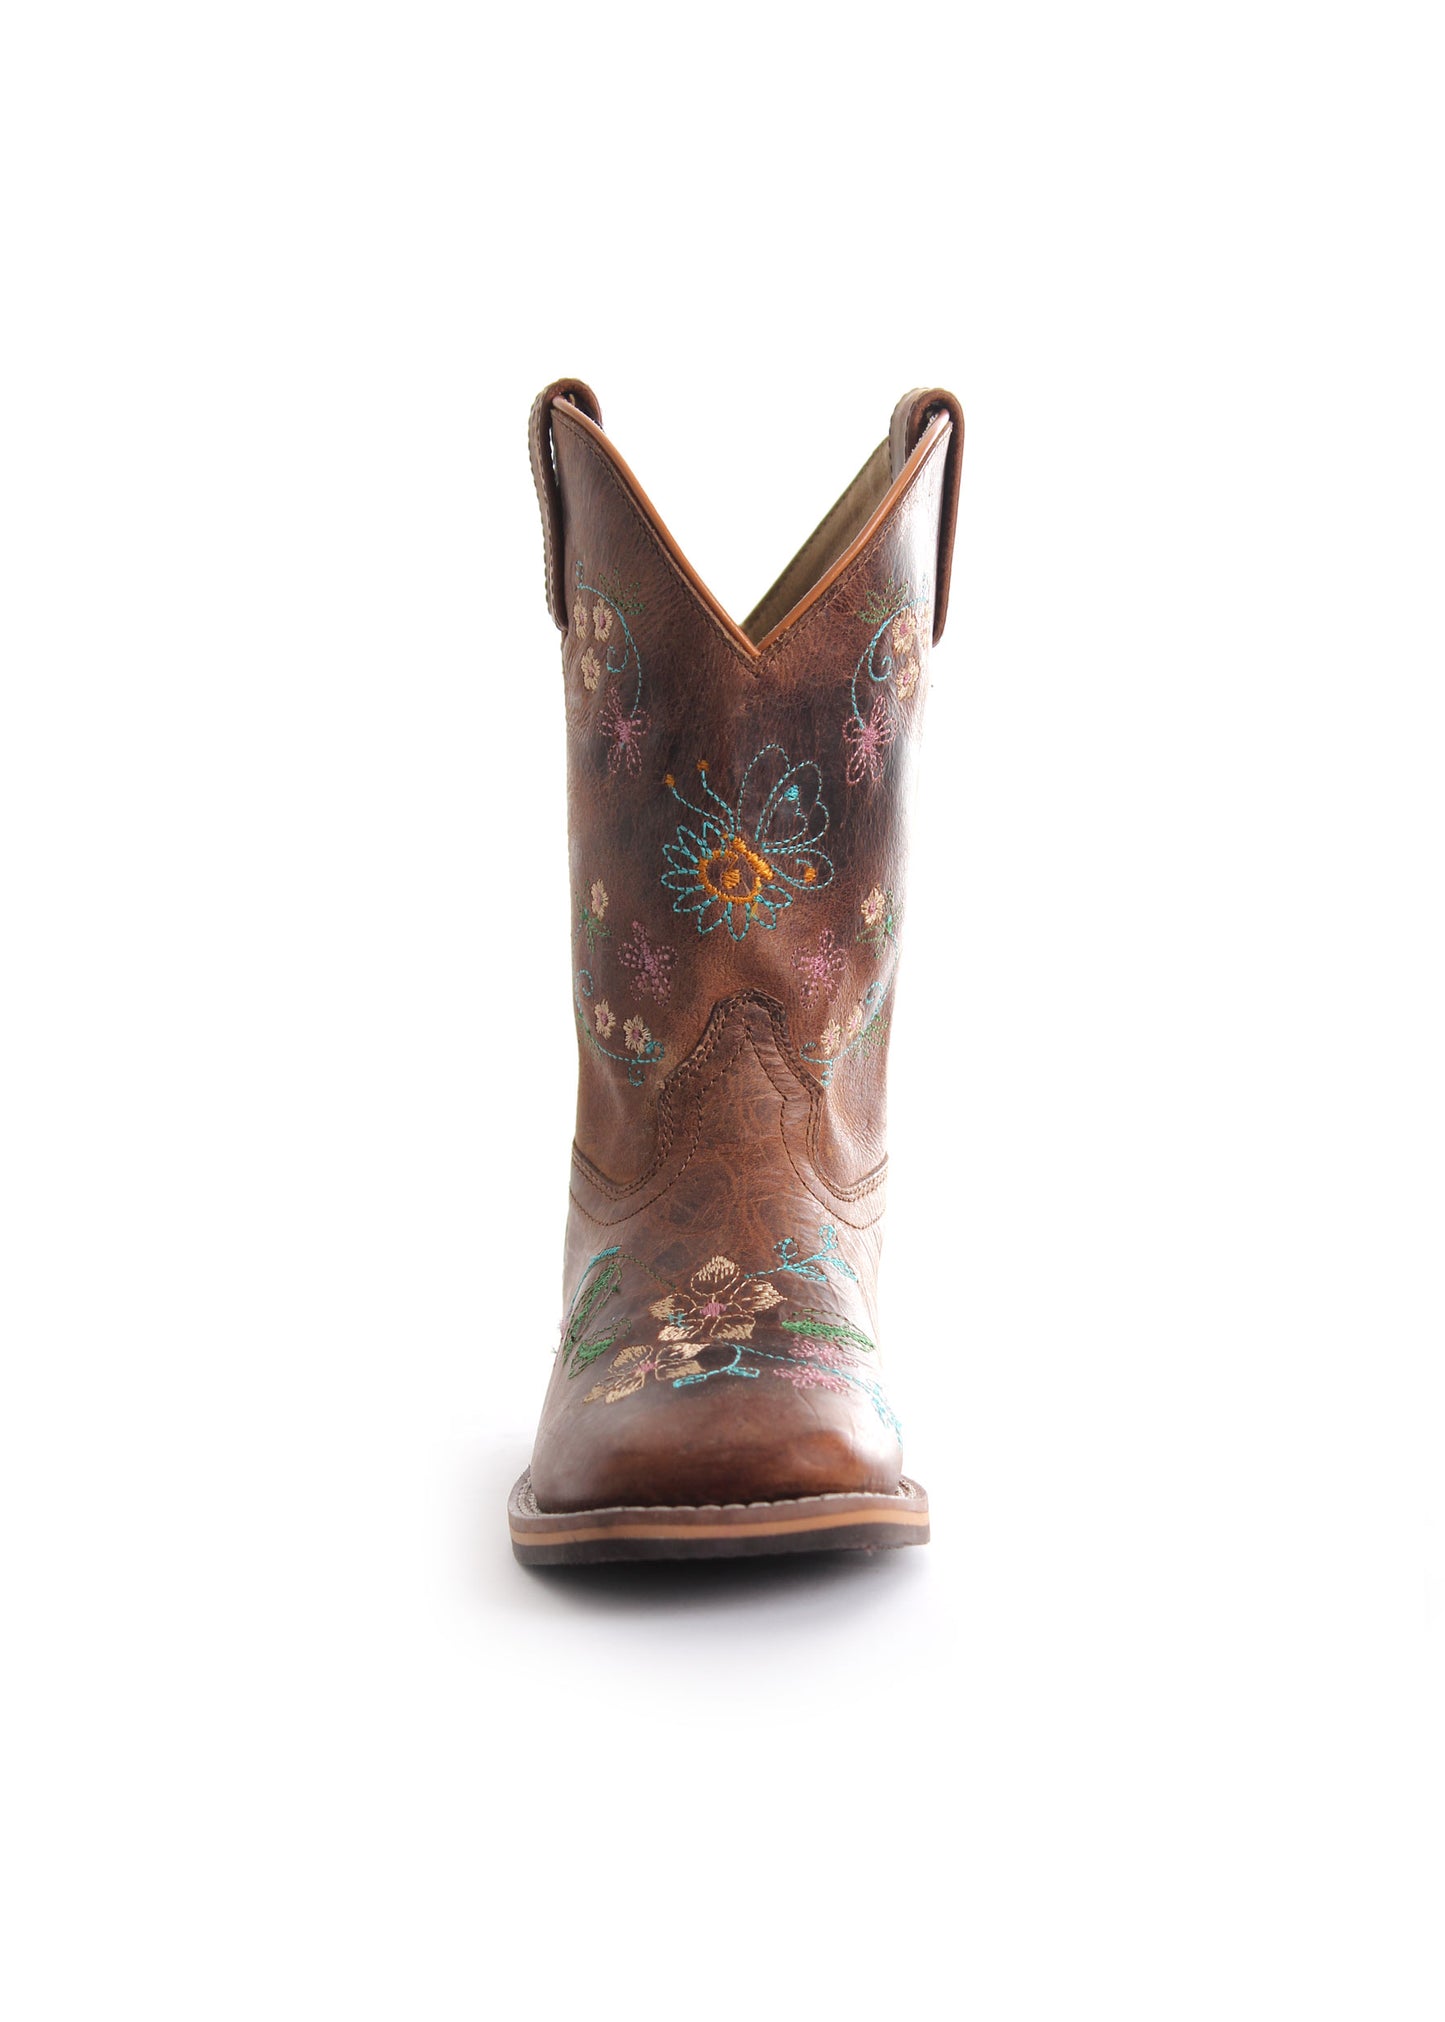 Pure Western Toddler Boots (Maybelle) - Oil Distressed Brown/Floral - PCP78047T